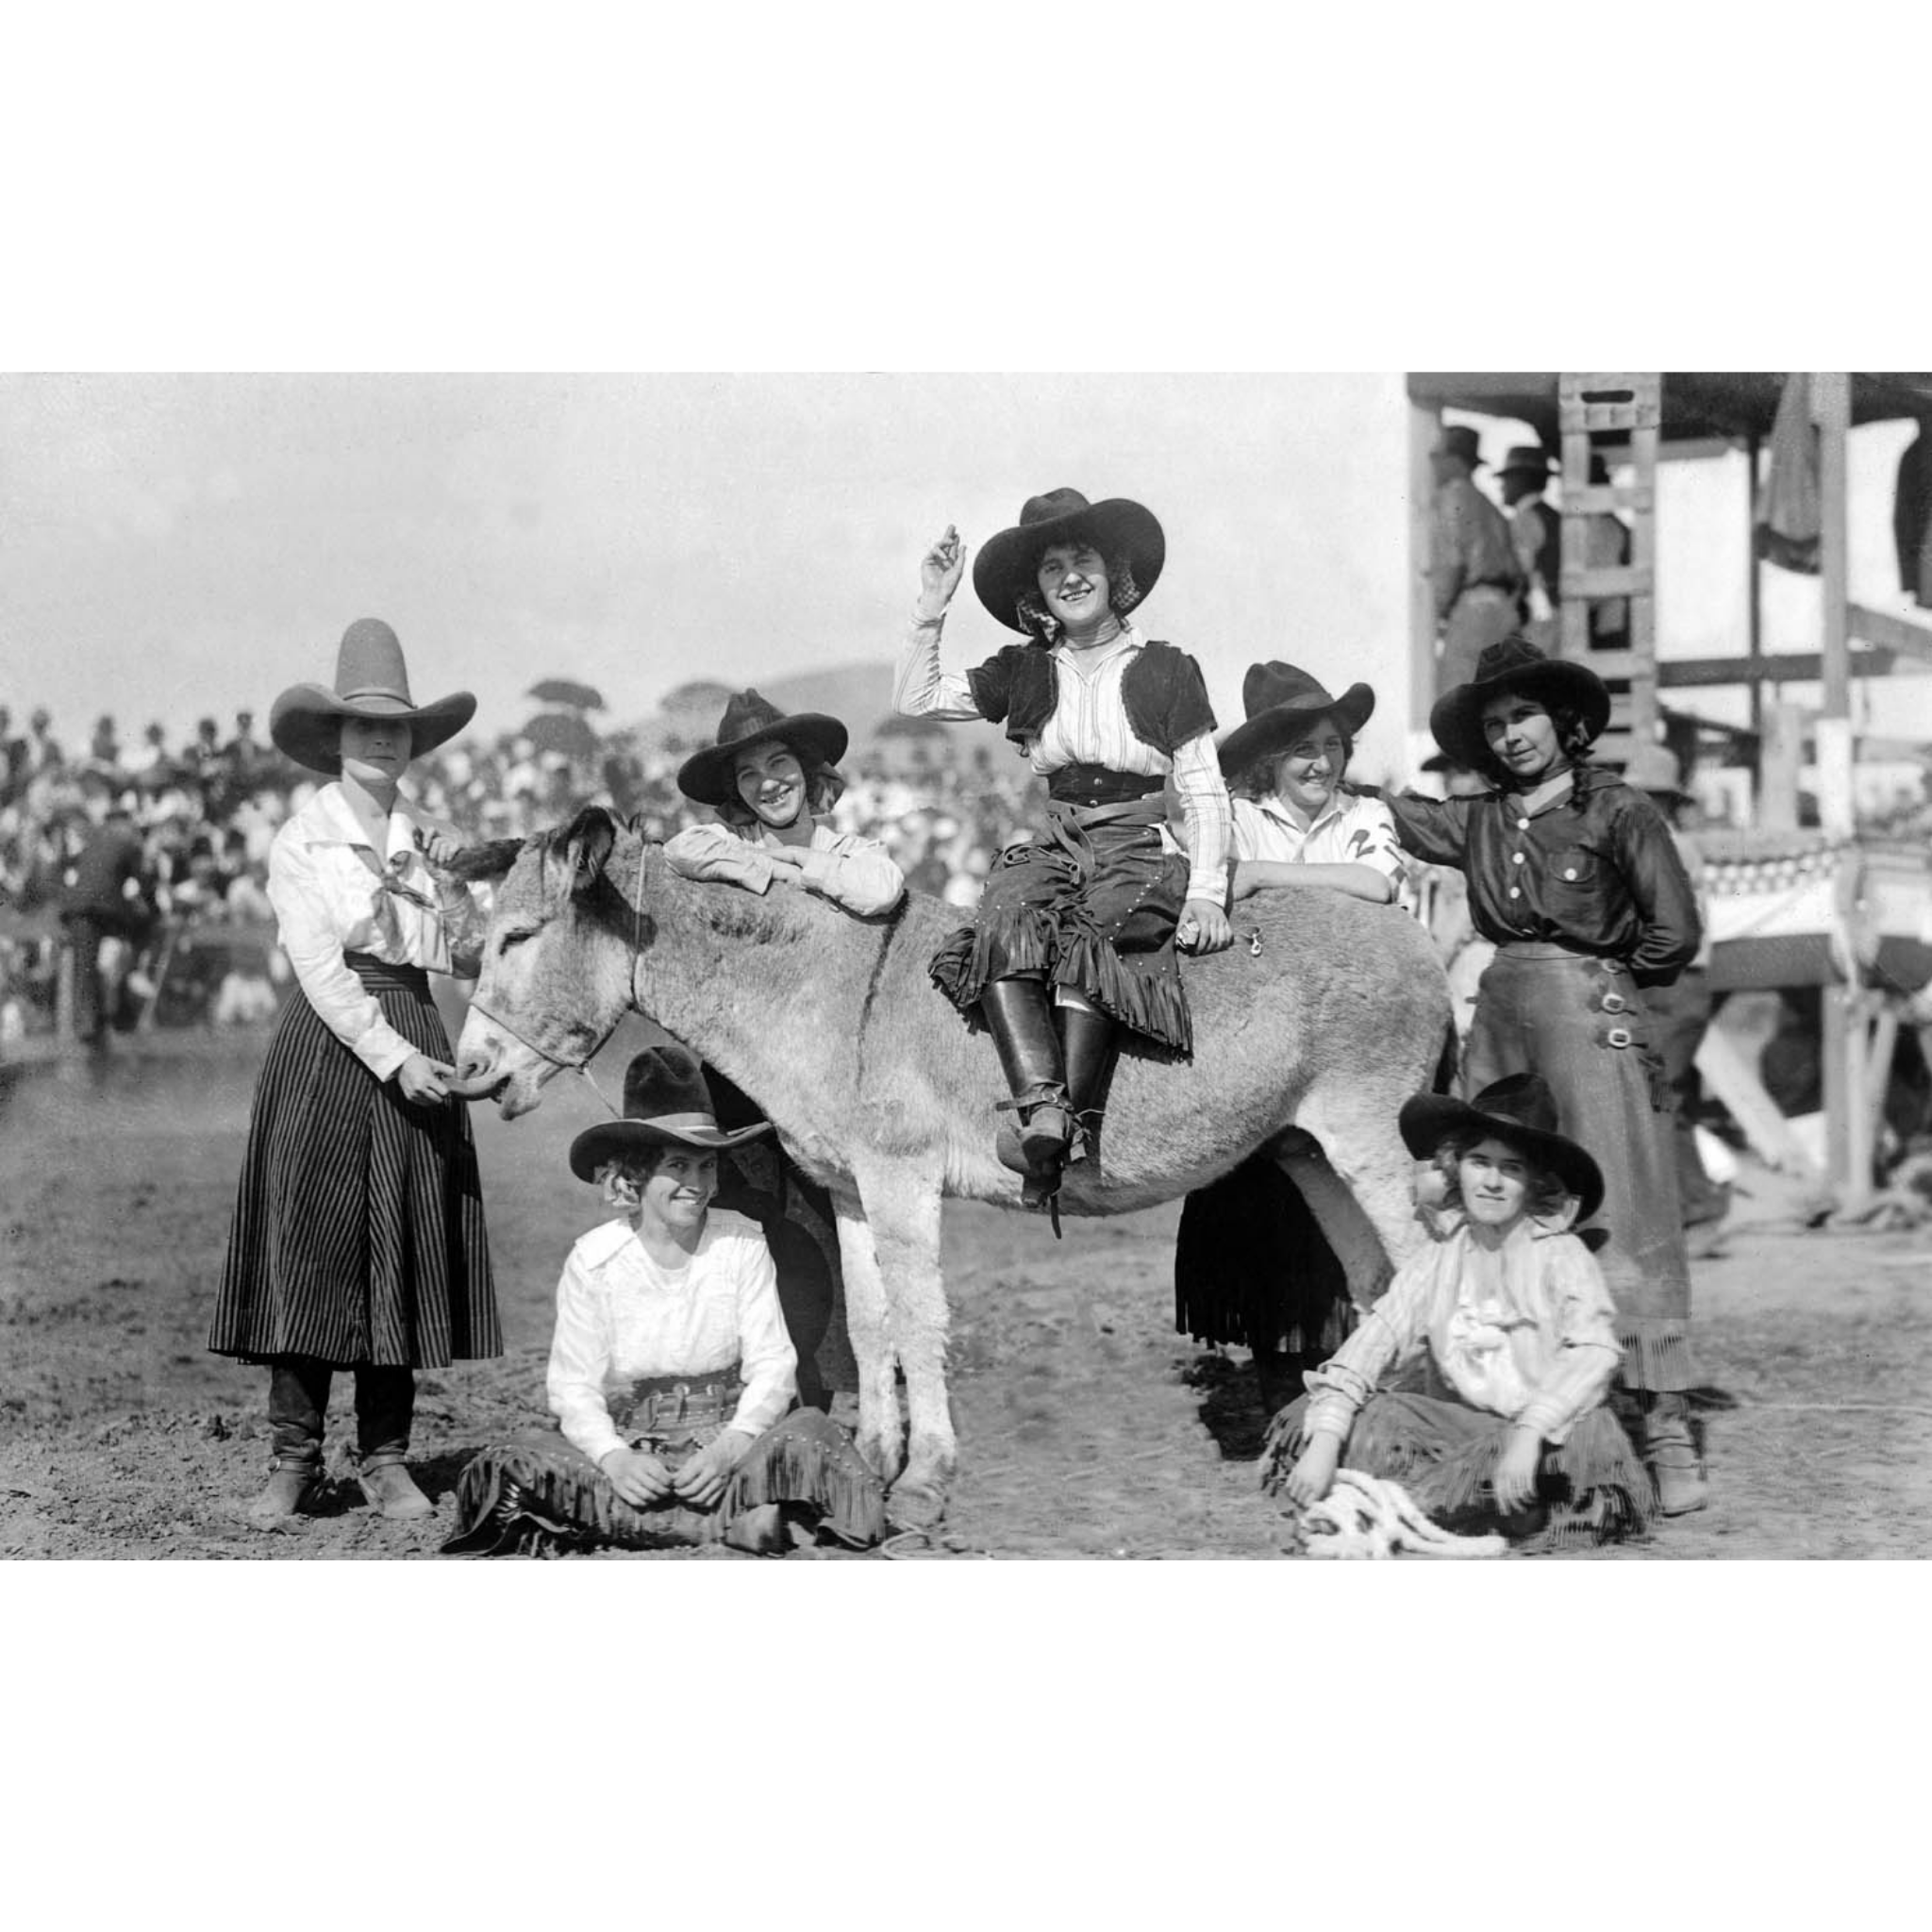 Rodeo Cowgirls 4 - Donkey - Doubleday - ca. 1925 Photograph